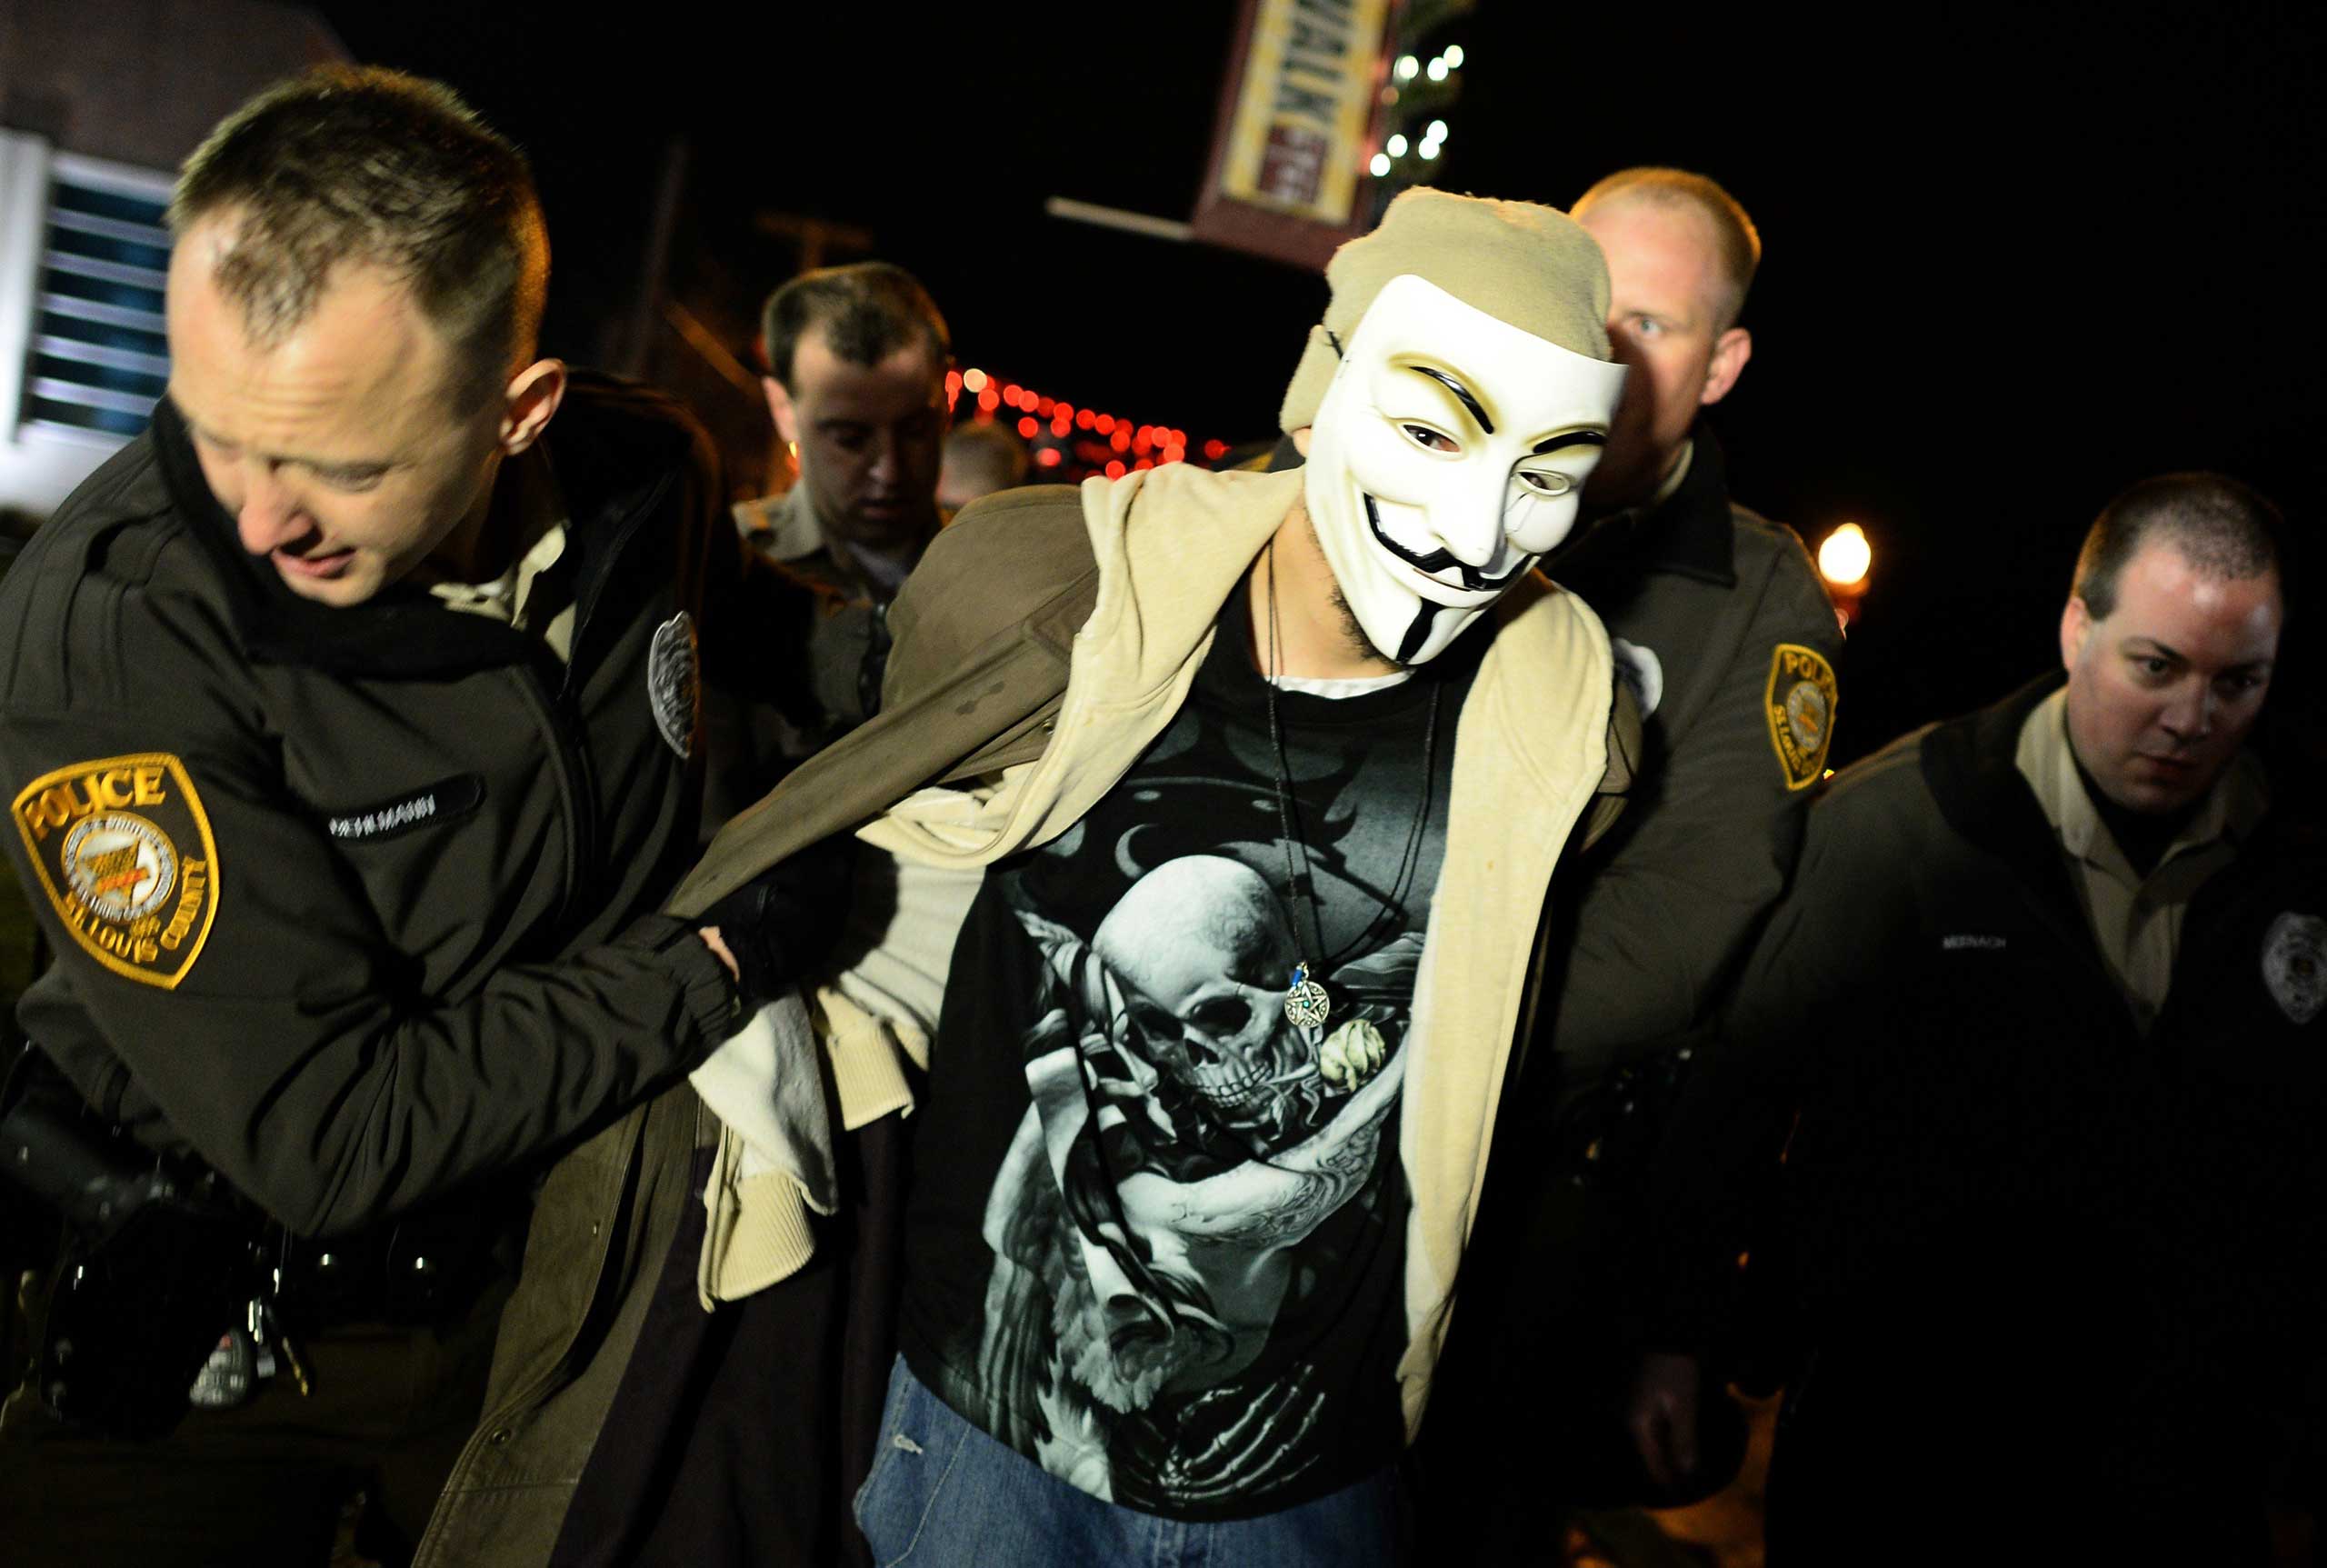 Police detain a demonstrator after he and others blocked a street near a police station in Ferguson, Mo. on Nov. 23, 2014